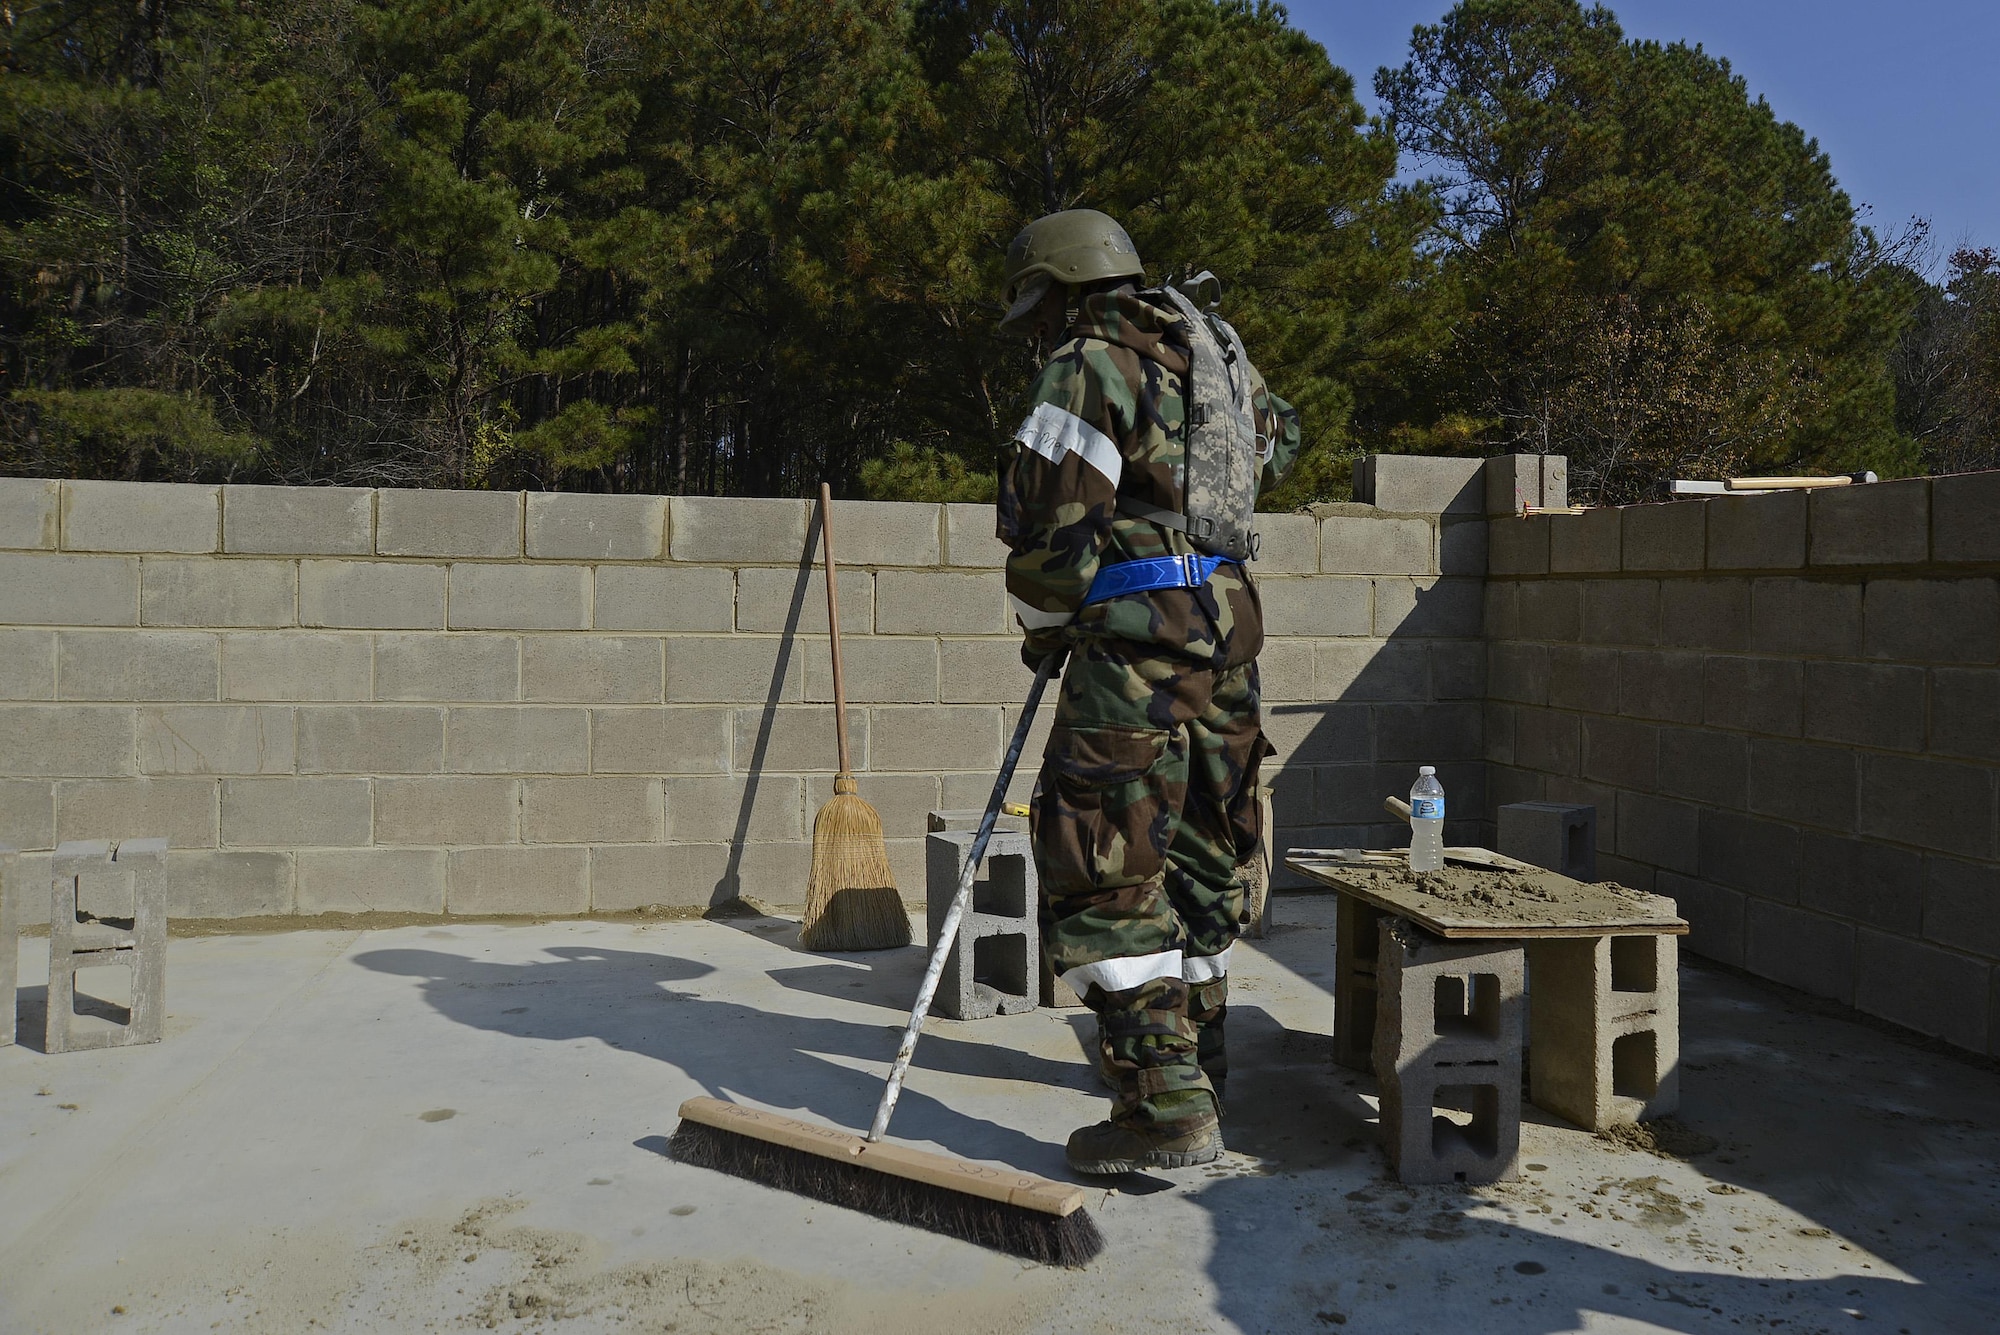 U.S. Air Force Senior Airman Rashon Reid, 20th Civil Engineer Squadron structural journeyman, sweeps away leftover mortar at Shaw Air Force Base, S.C., Nov. 16, 2016. Mortar is the substance that keeps a brick structure together. (U.S. Air Force photo by Airman 1st Class BrieAnna Stillman)